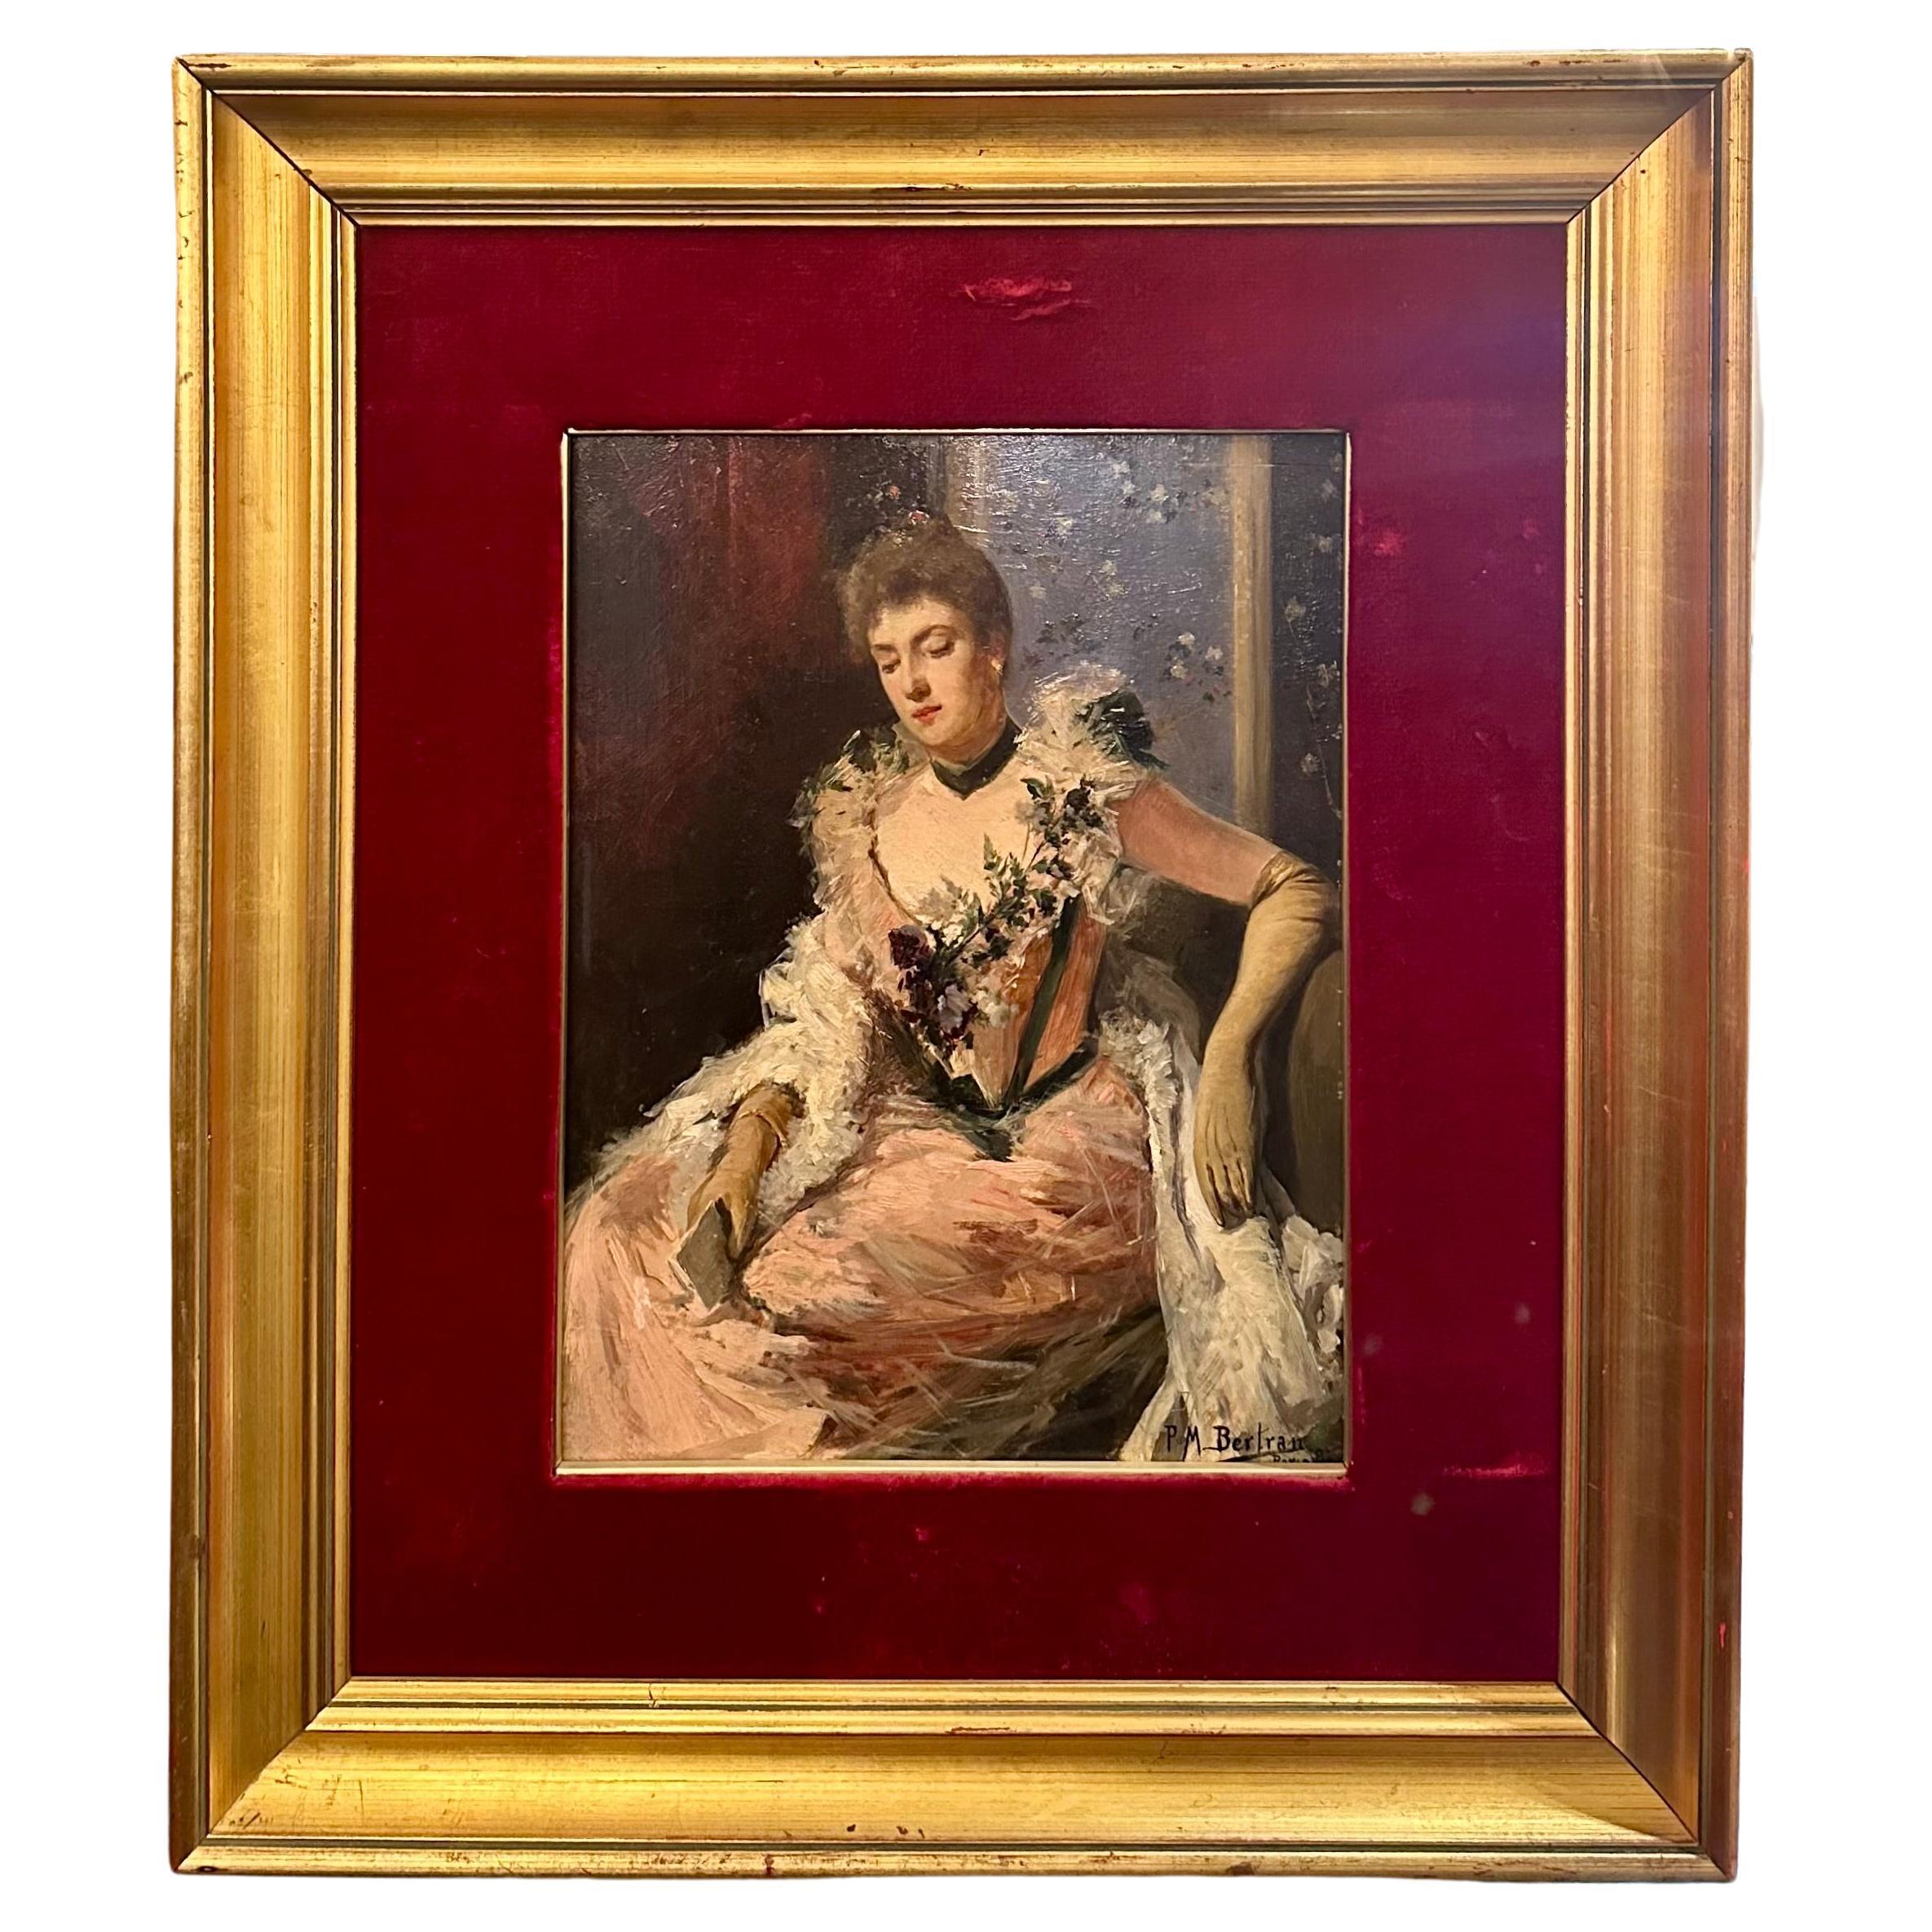 Antique French Oil on Panel Painting of a Woman by "P.M. Bertran" Circa 1900's. For Sale